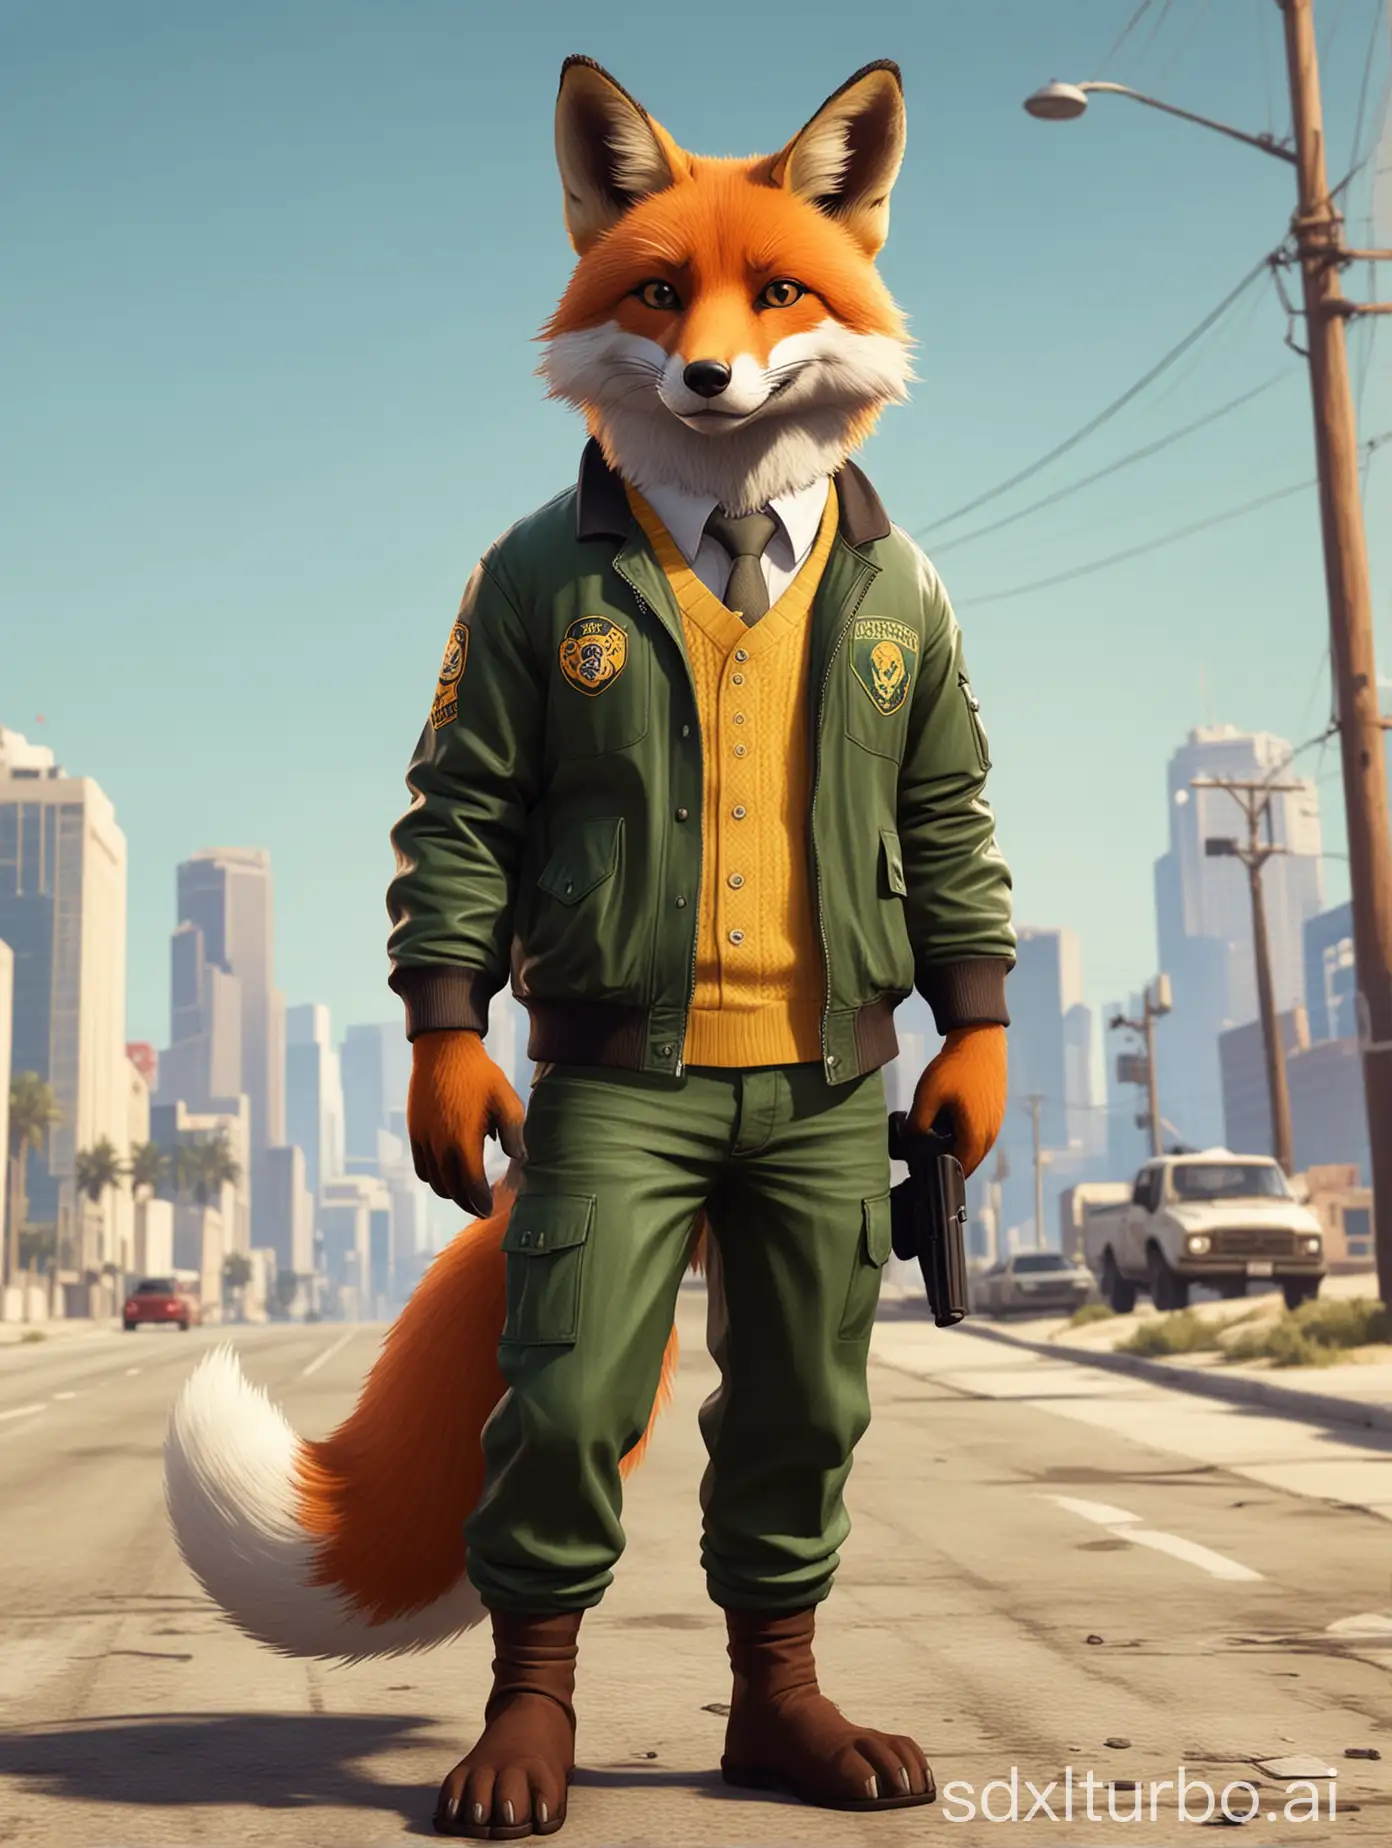 A fox in the style of GTA 5